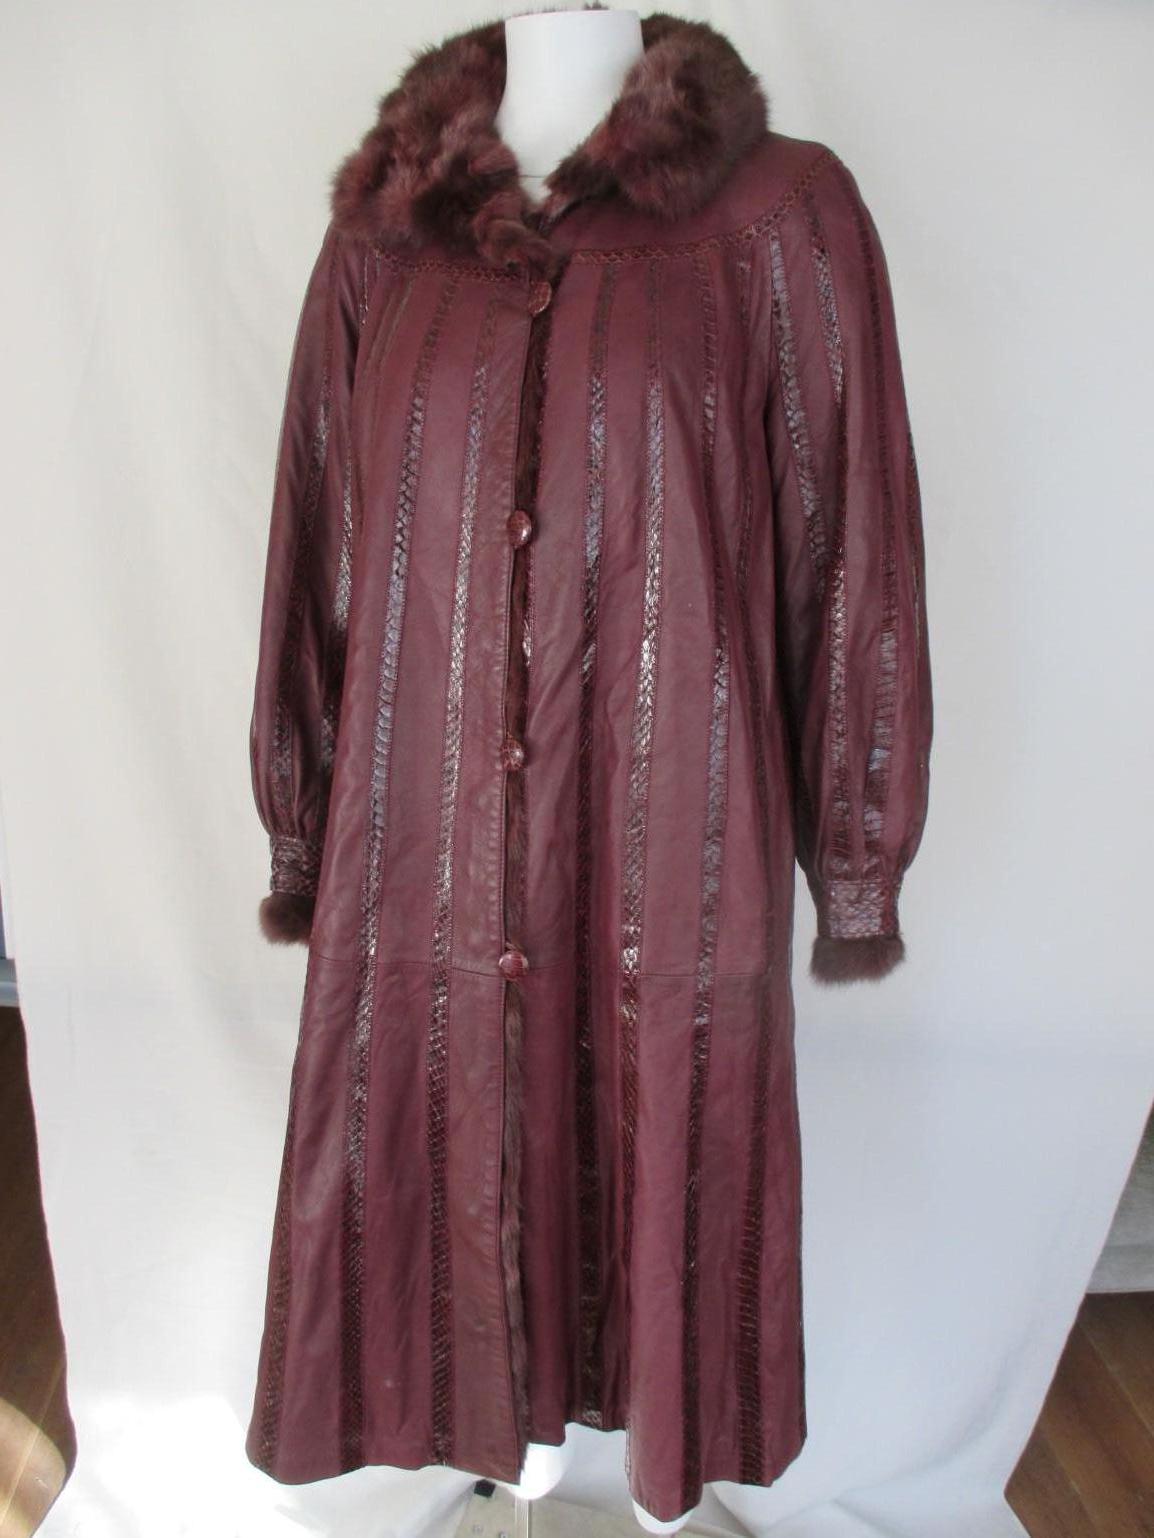 This vintage coat is made from quality soft fur and leather with panels of snakeskin, can be worn from both sides and separate with buttons.
3 coats in one!  A double coat and 2 singles, these are very light to wear.
It has 2 pockets in and out at